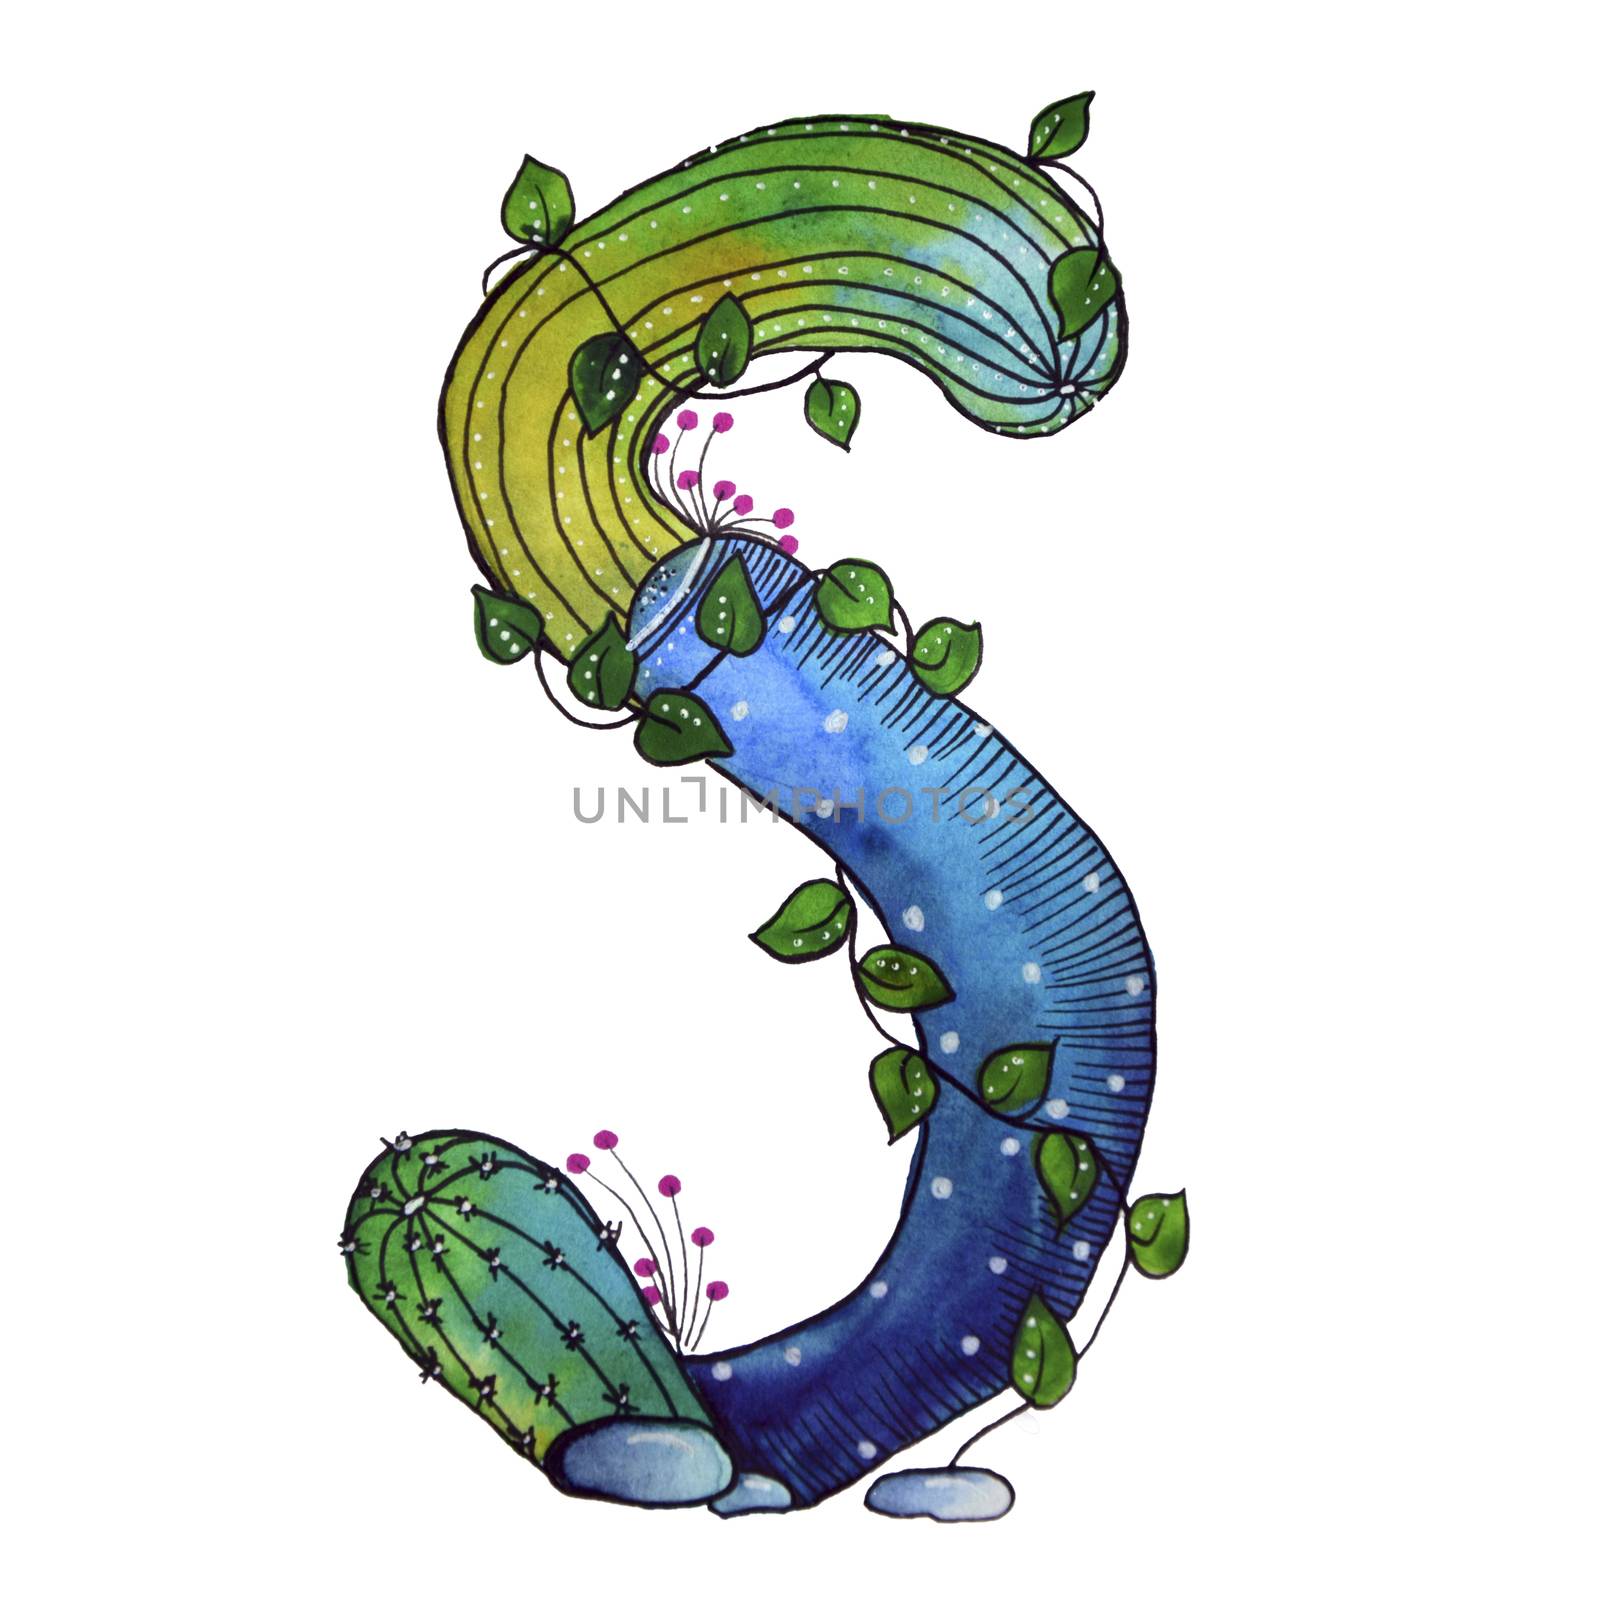 S letter in the form of cactus in blue colors, green eco English letter Illustration on a white background by kimbo-bo